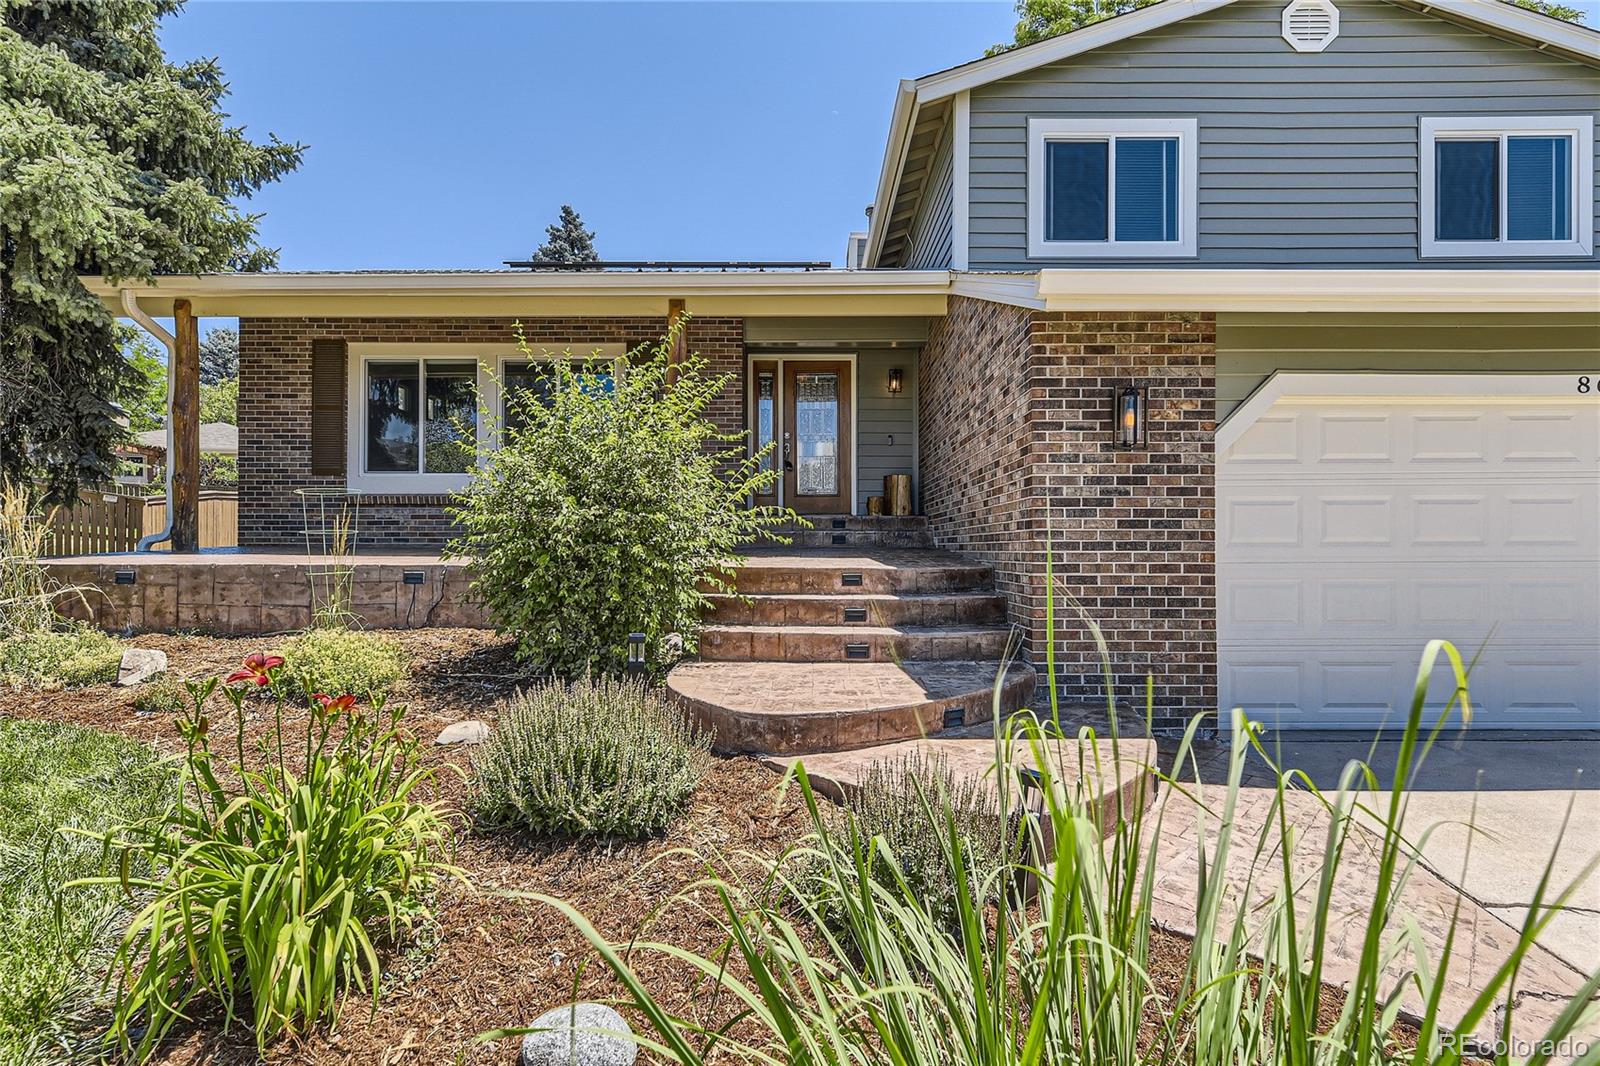 8643 S Woody Way, highlands ranch MLS: 5635371 Beds: 4 Baths: 3 Price: $675,000